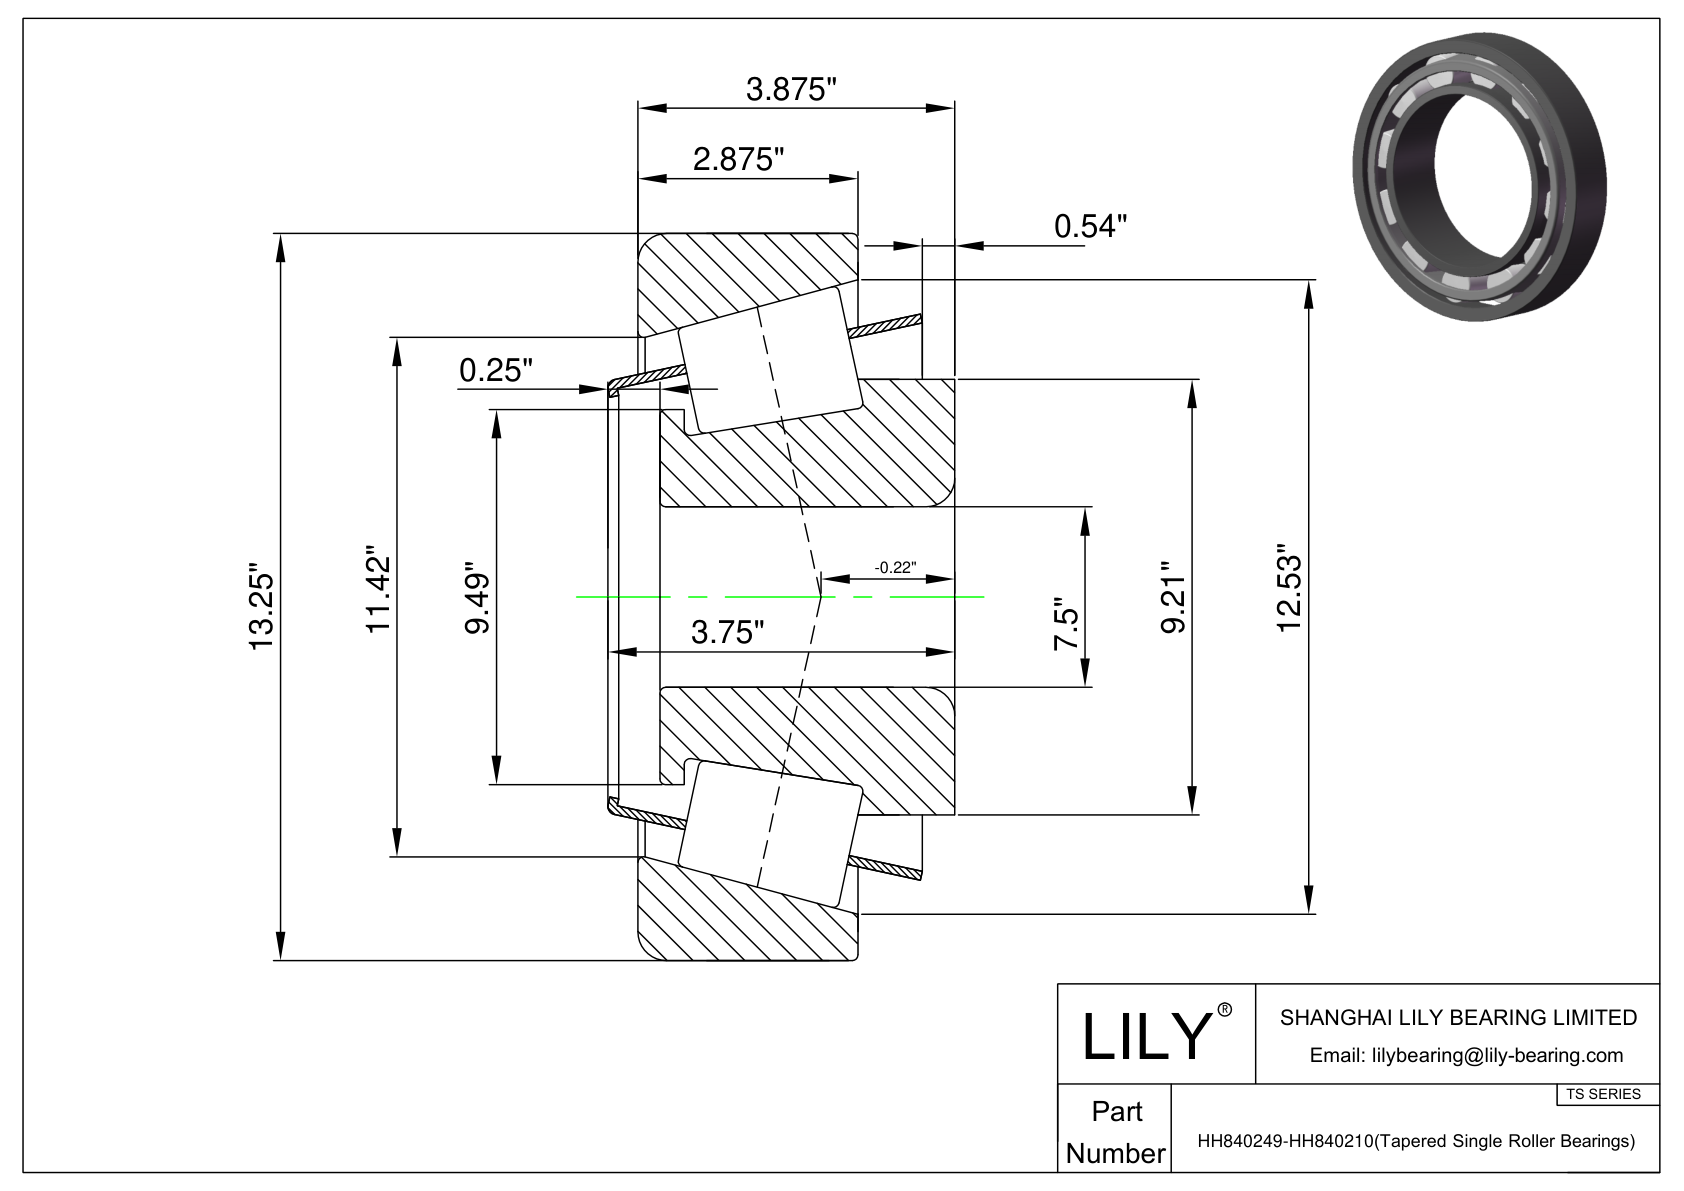 HH840249-HH840210 TS (Tapered Single Roller Bearings) (Imperial) cad drawing